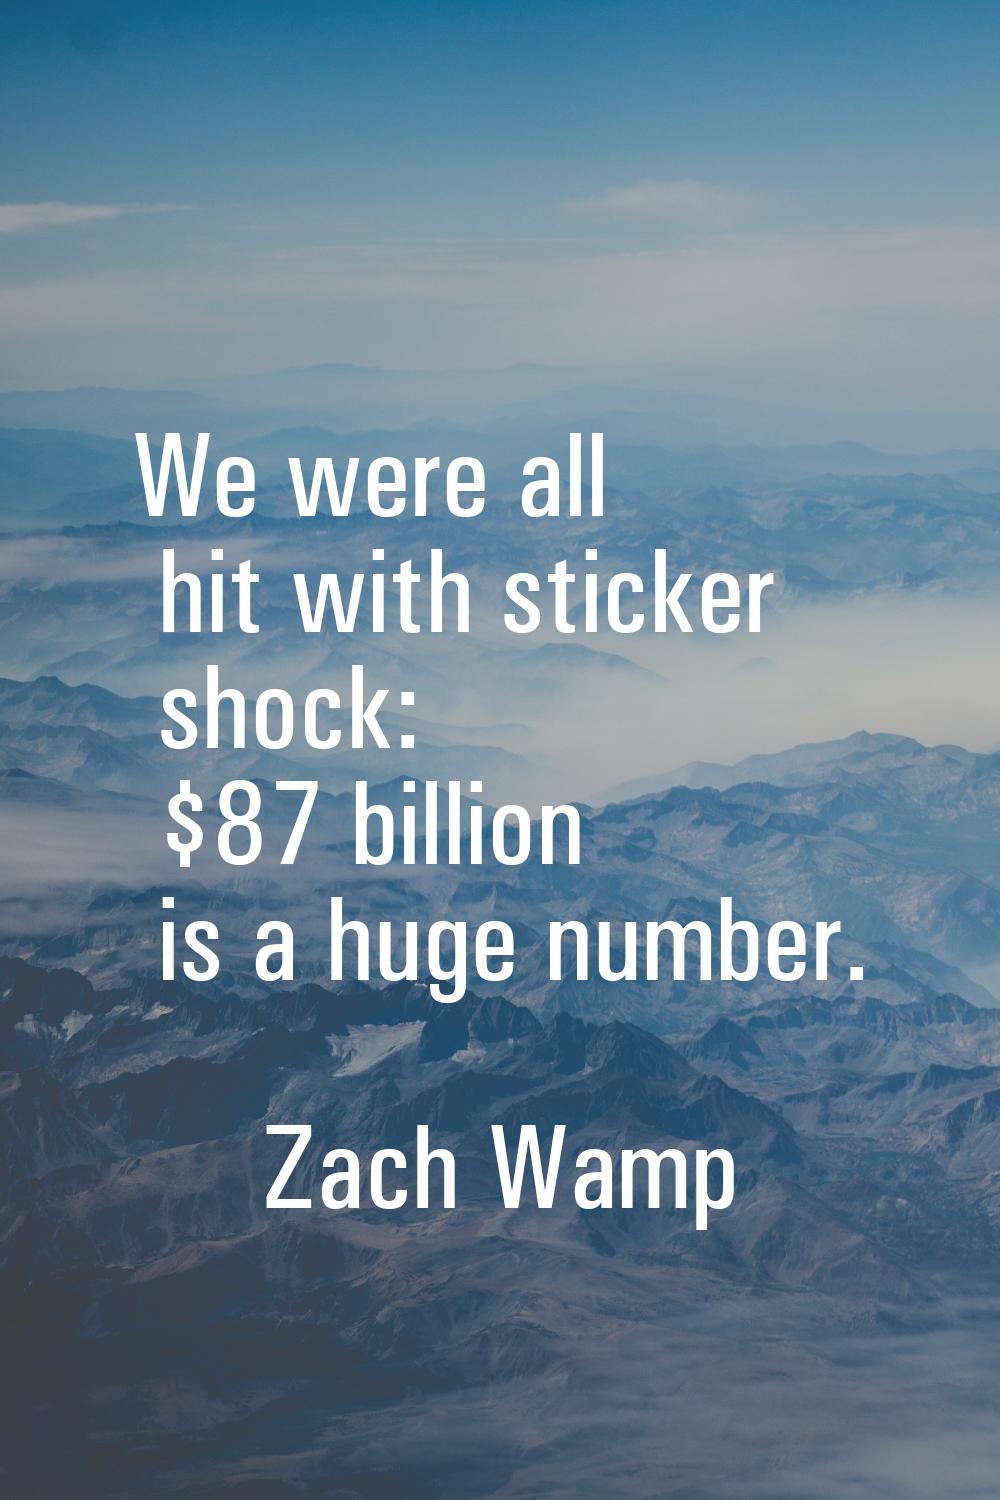 We were all hit with sticker shock: $87 billion is a huge number.